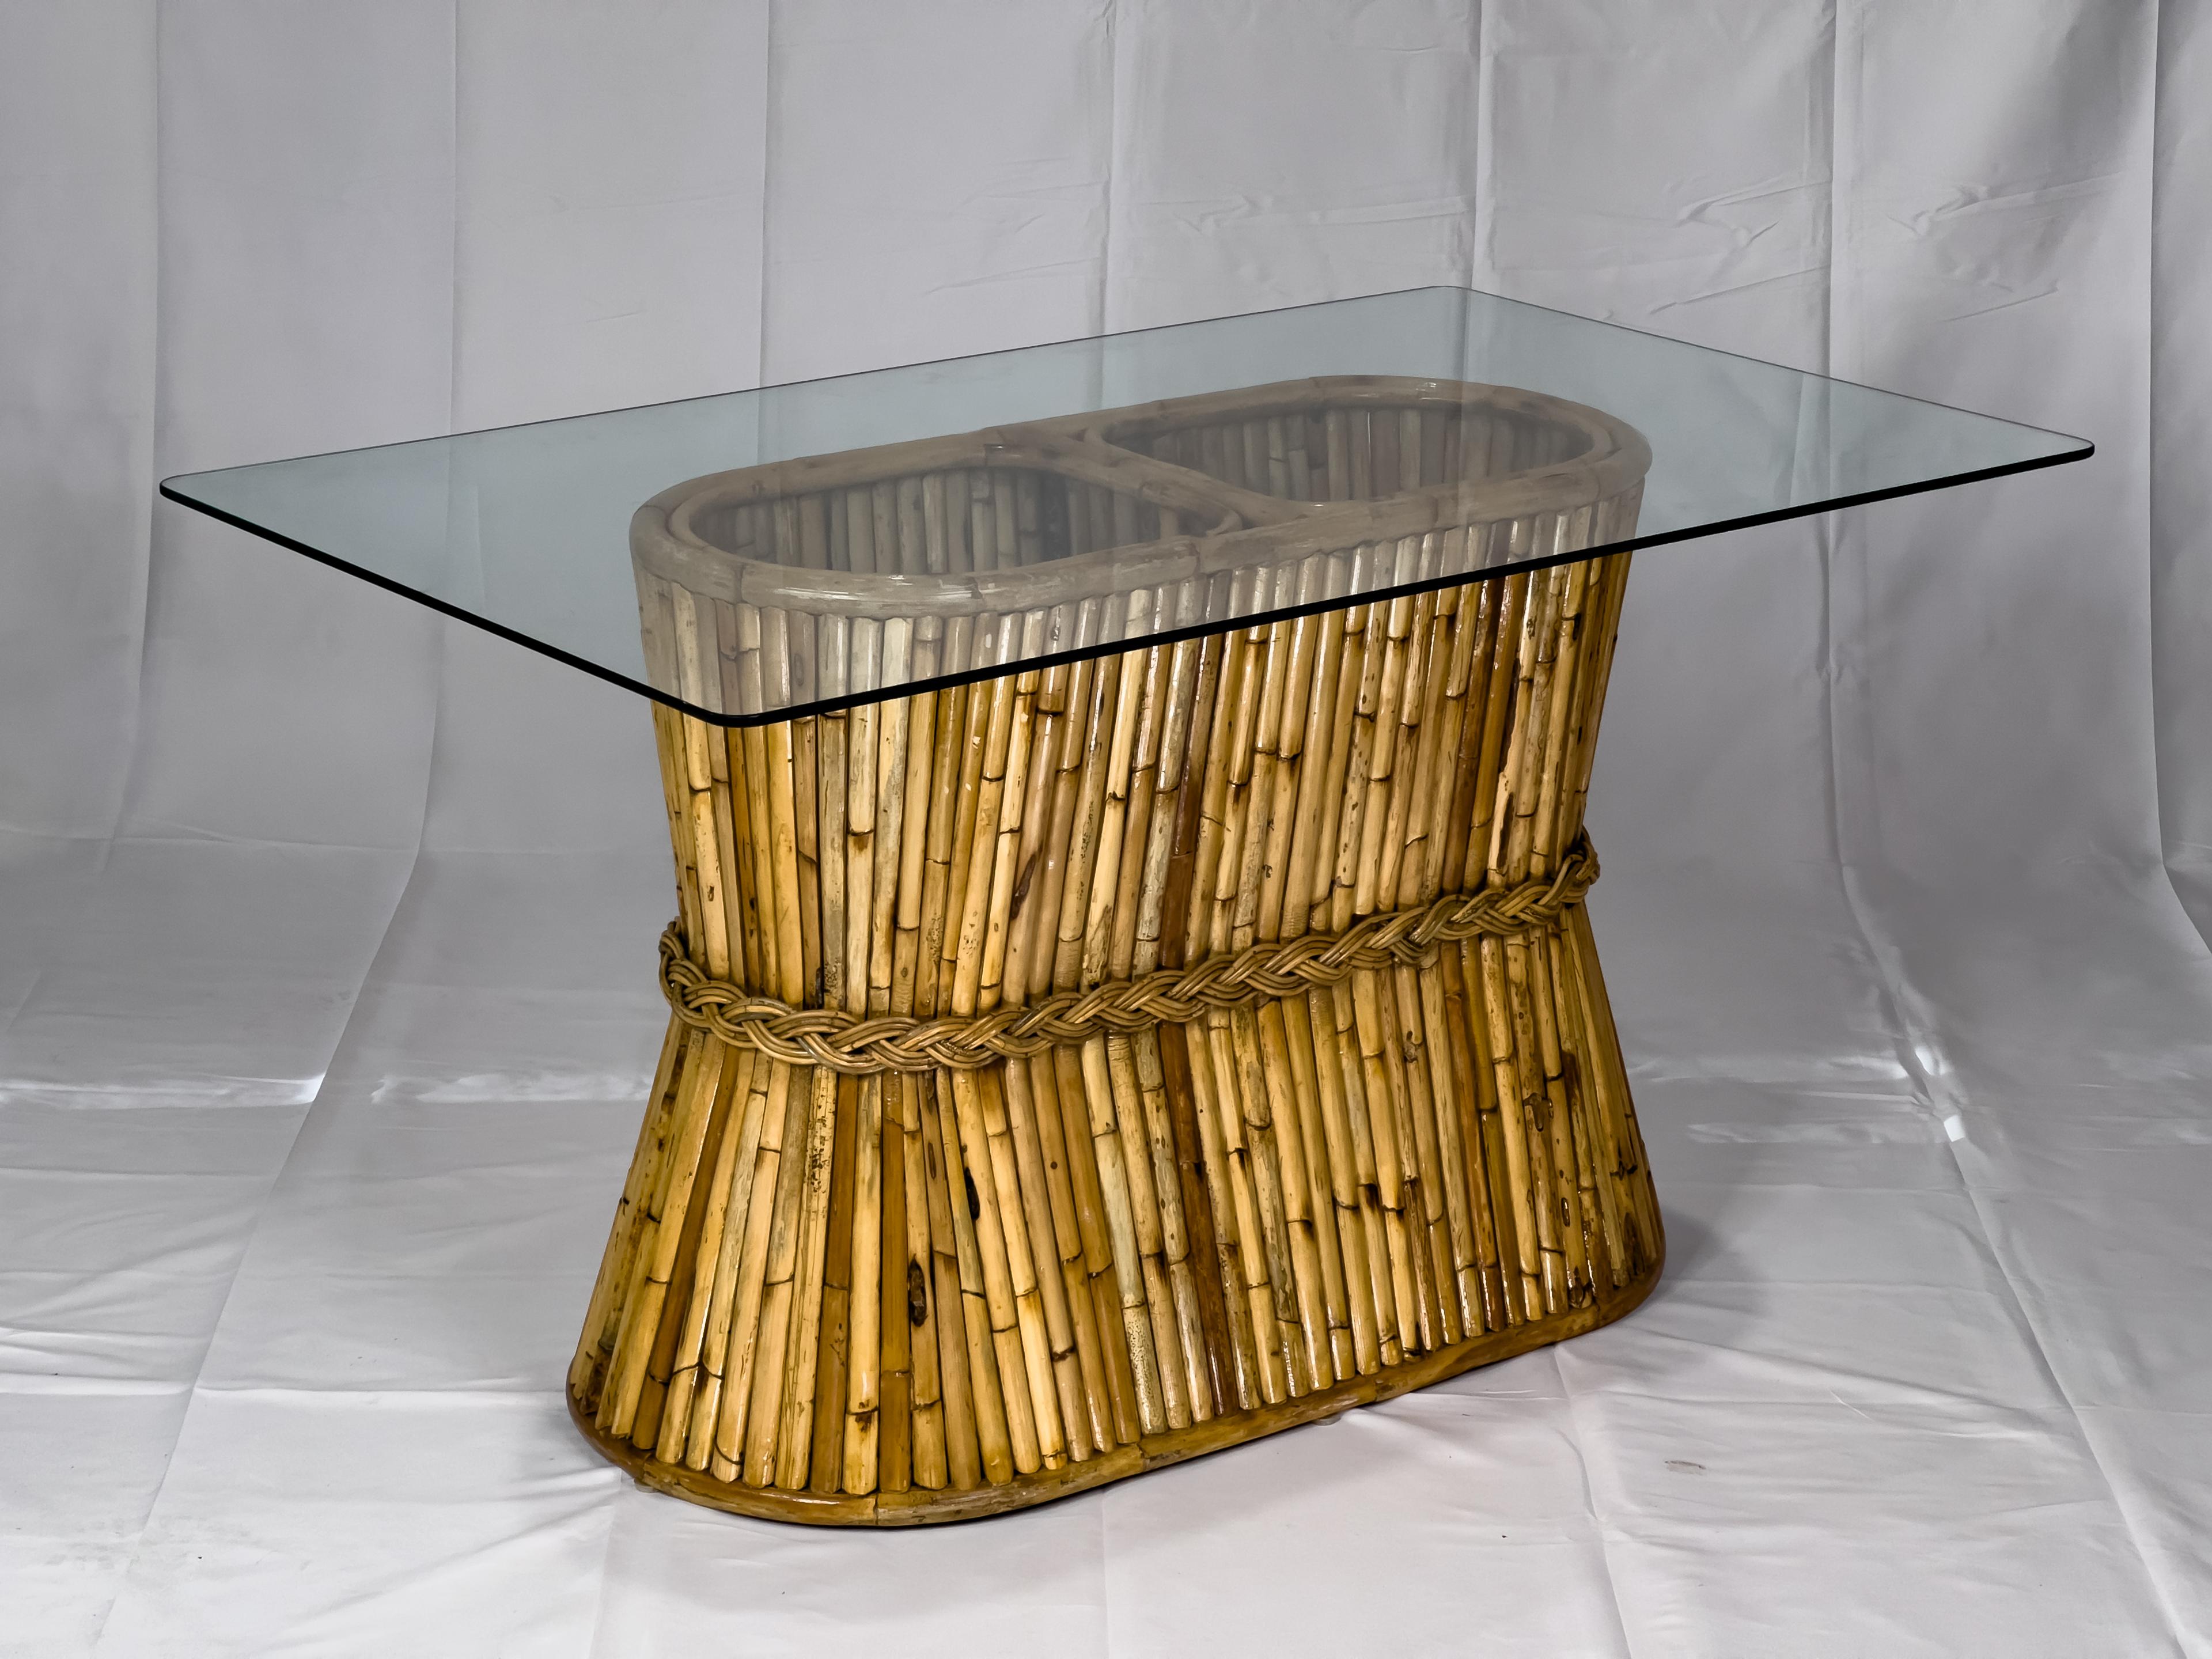 Hand-Woven McGuire Table and Chair Set with Cracked Ice Pattern